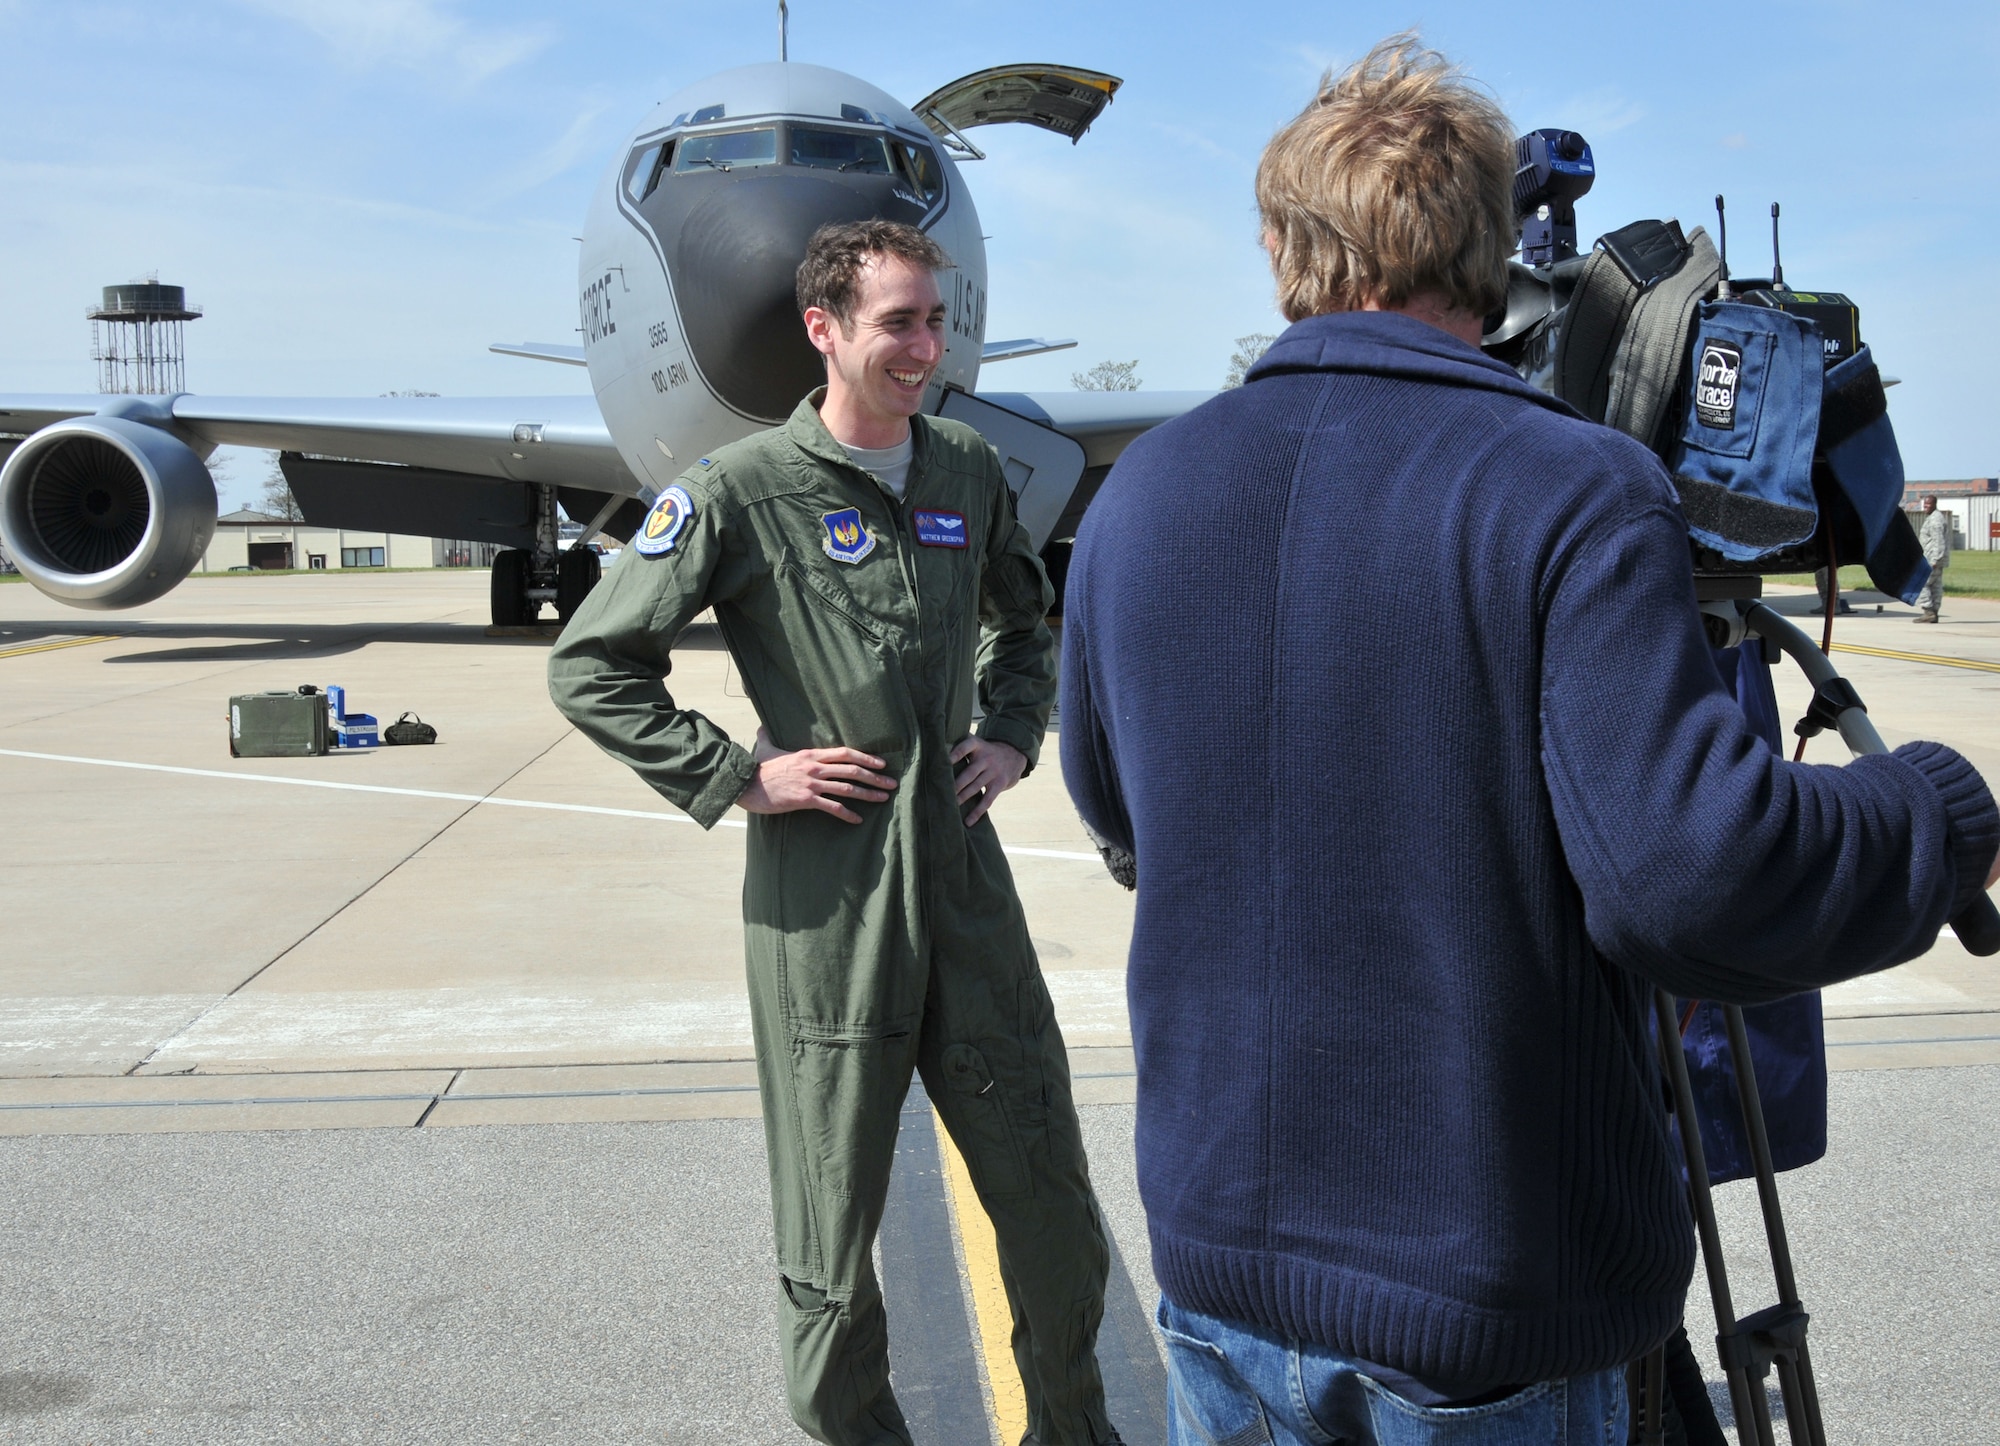 RAF MILDENHALL, England - 1st Lt. Matthew Greenspan, 351st Air Refueling Squadron pilot, is interviewed by a local television crew here after flying them during a real-world air-to-air refueling mission over the coast of England April 27. In addition to supporting 100th Air Refueling Wing and 48th Fighter Wing training requirements, this mission also supported the 100th ARW Public Affairs Media Flight Program which allows reporters to get a detailed look at the heart of the base mission and enable them to make balanced decisions in the course of their community work. (U.S. Air Force photo/Tech. Sgt. Kevin Wallace)